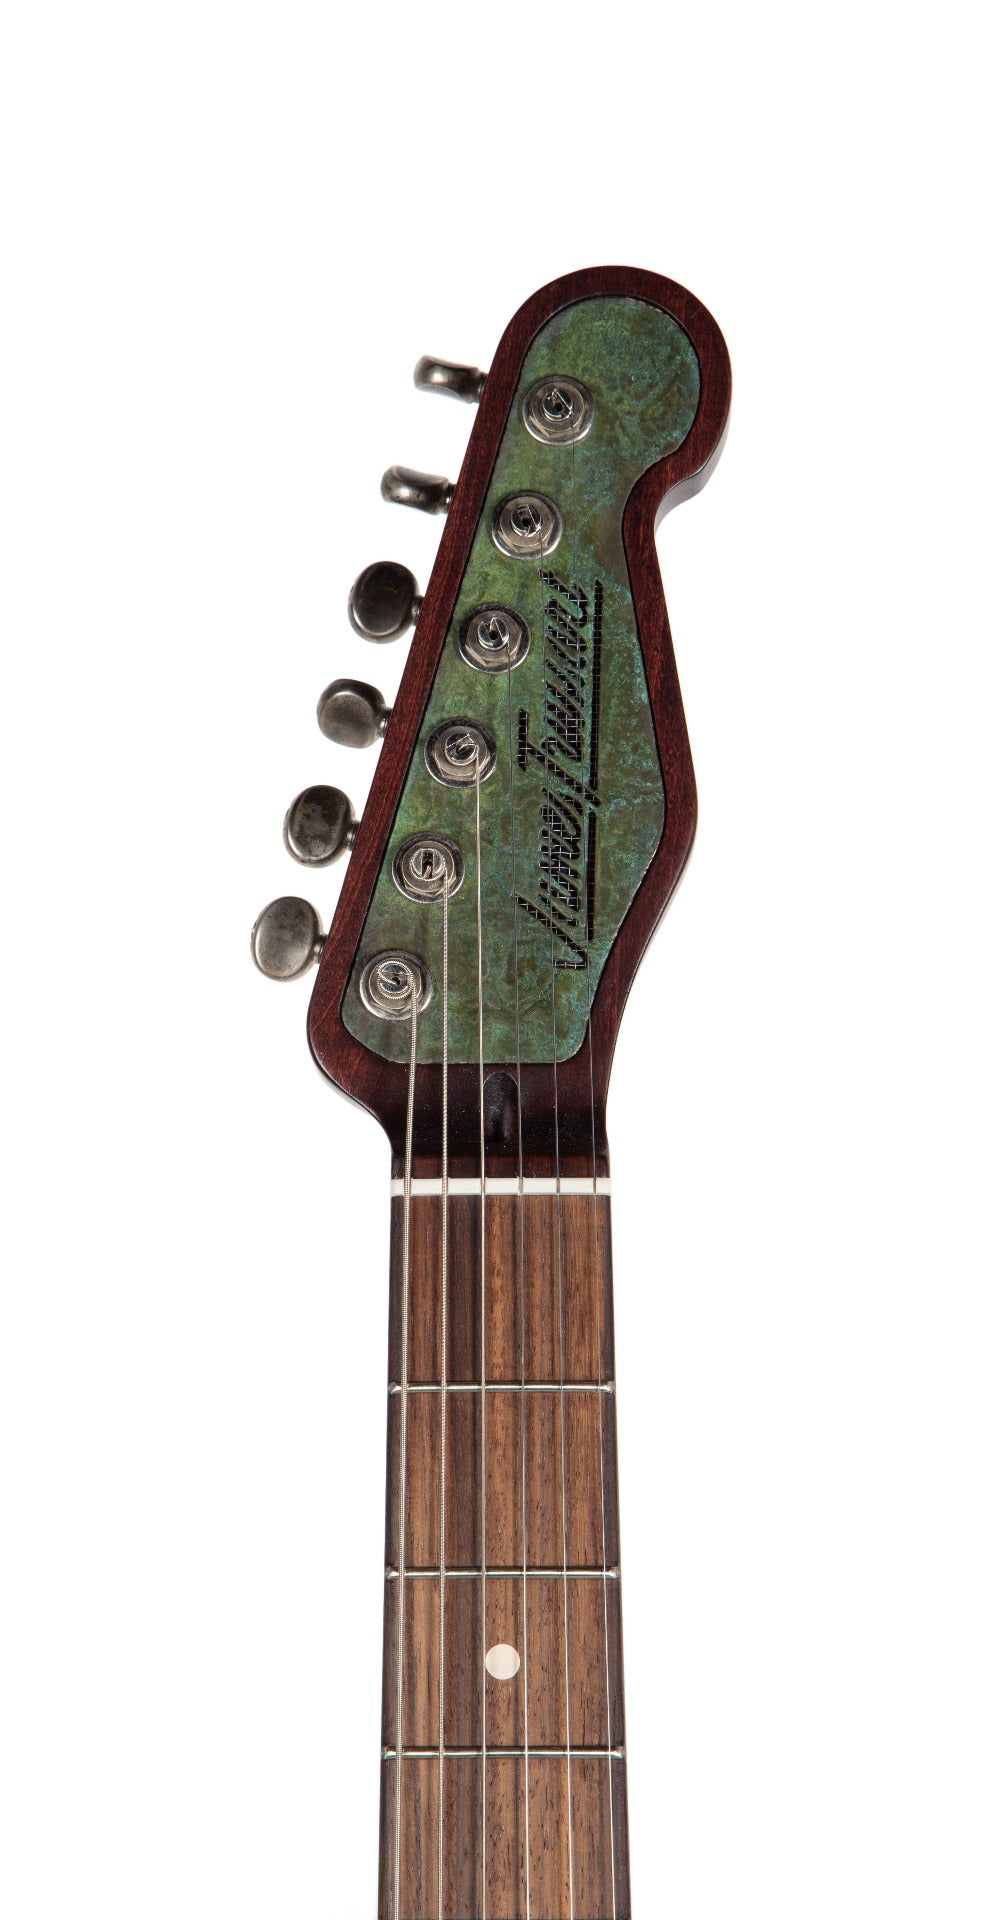 Trussart Steelcaster Electric Guitar in Titanic Green Gator Engraved